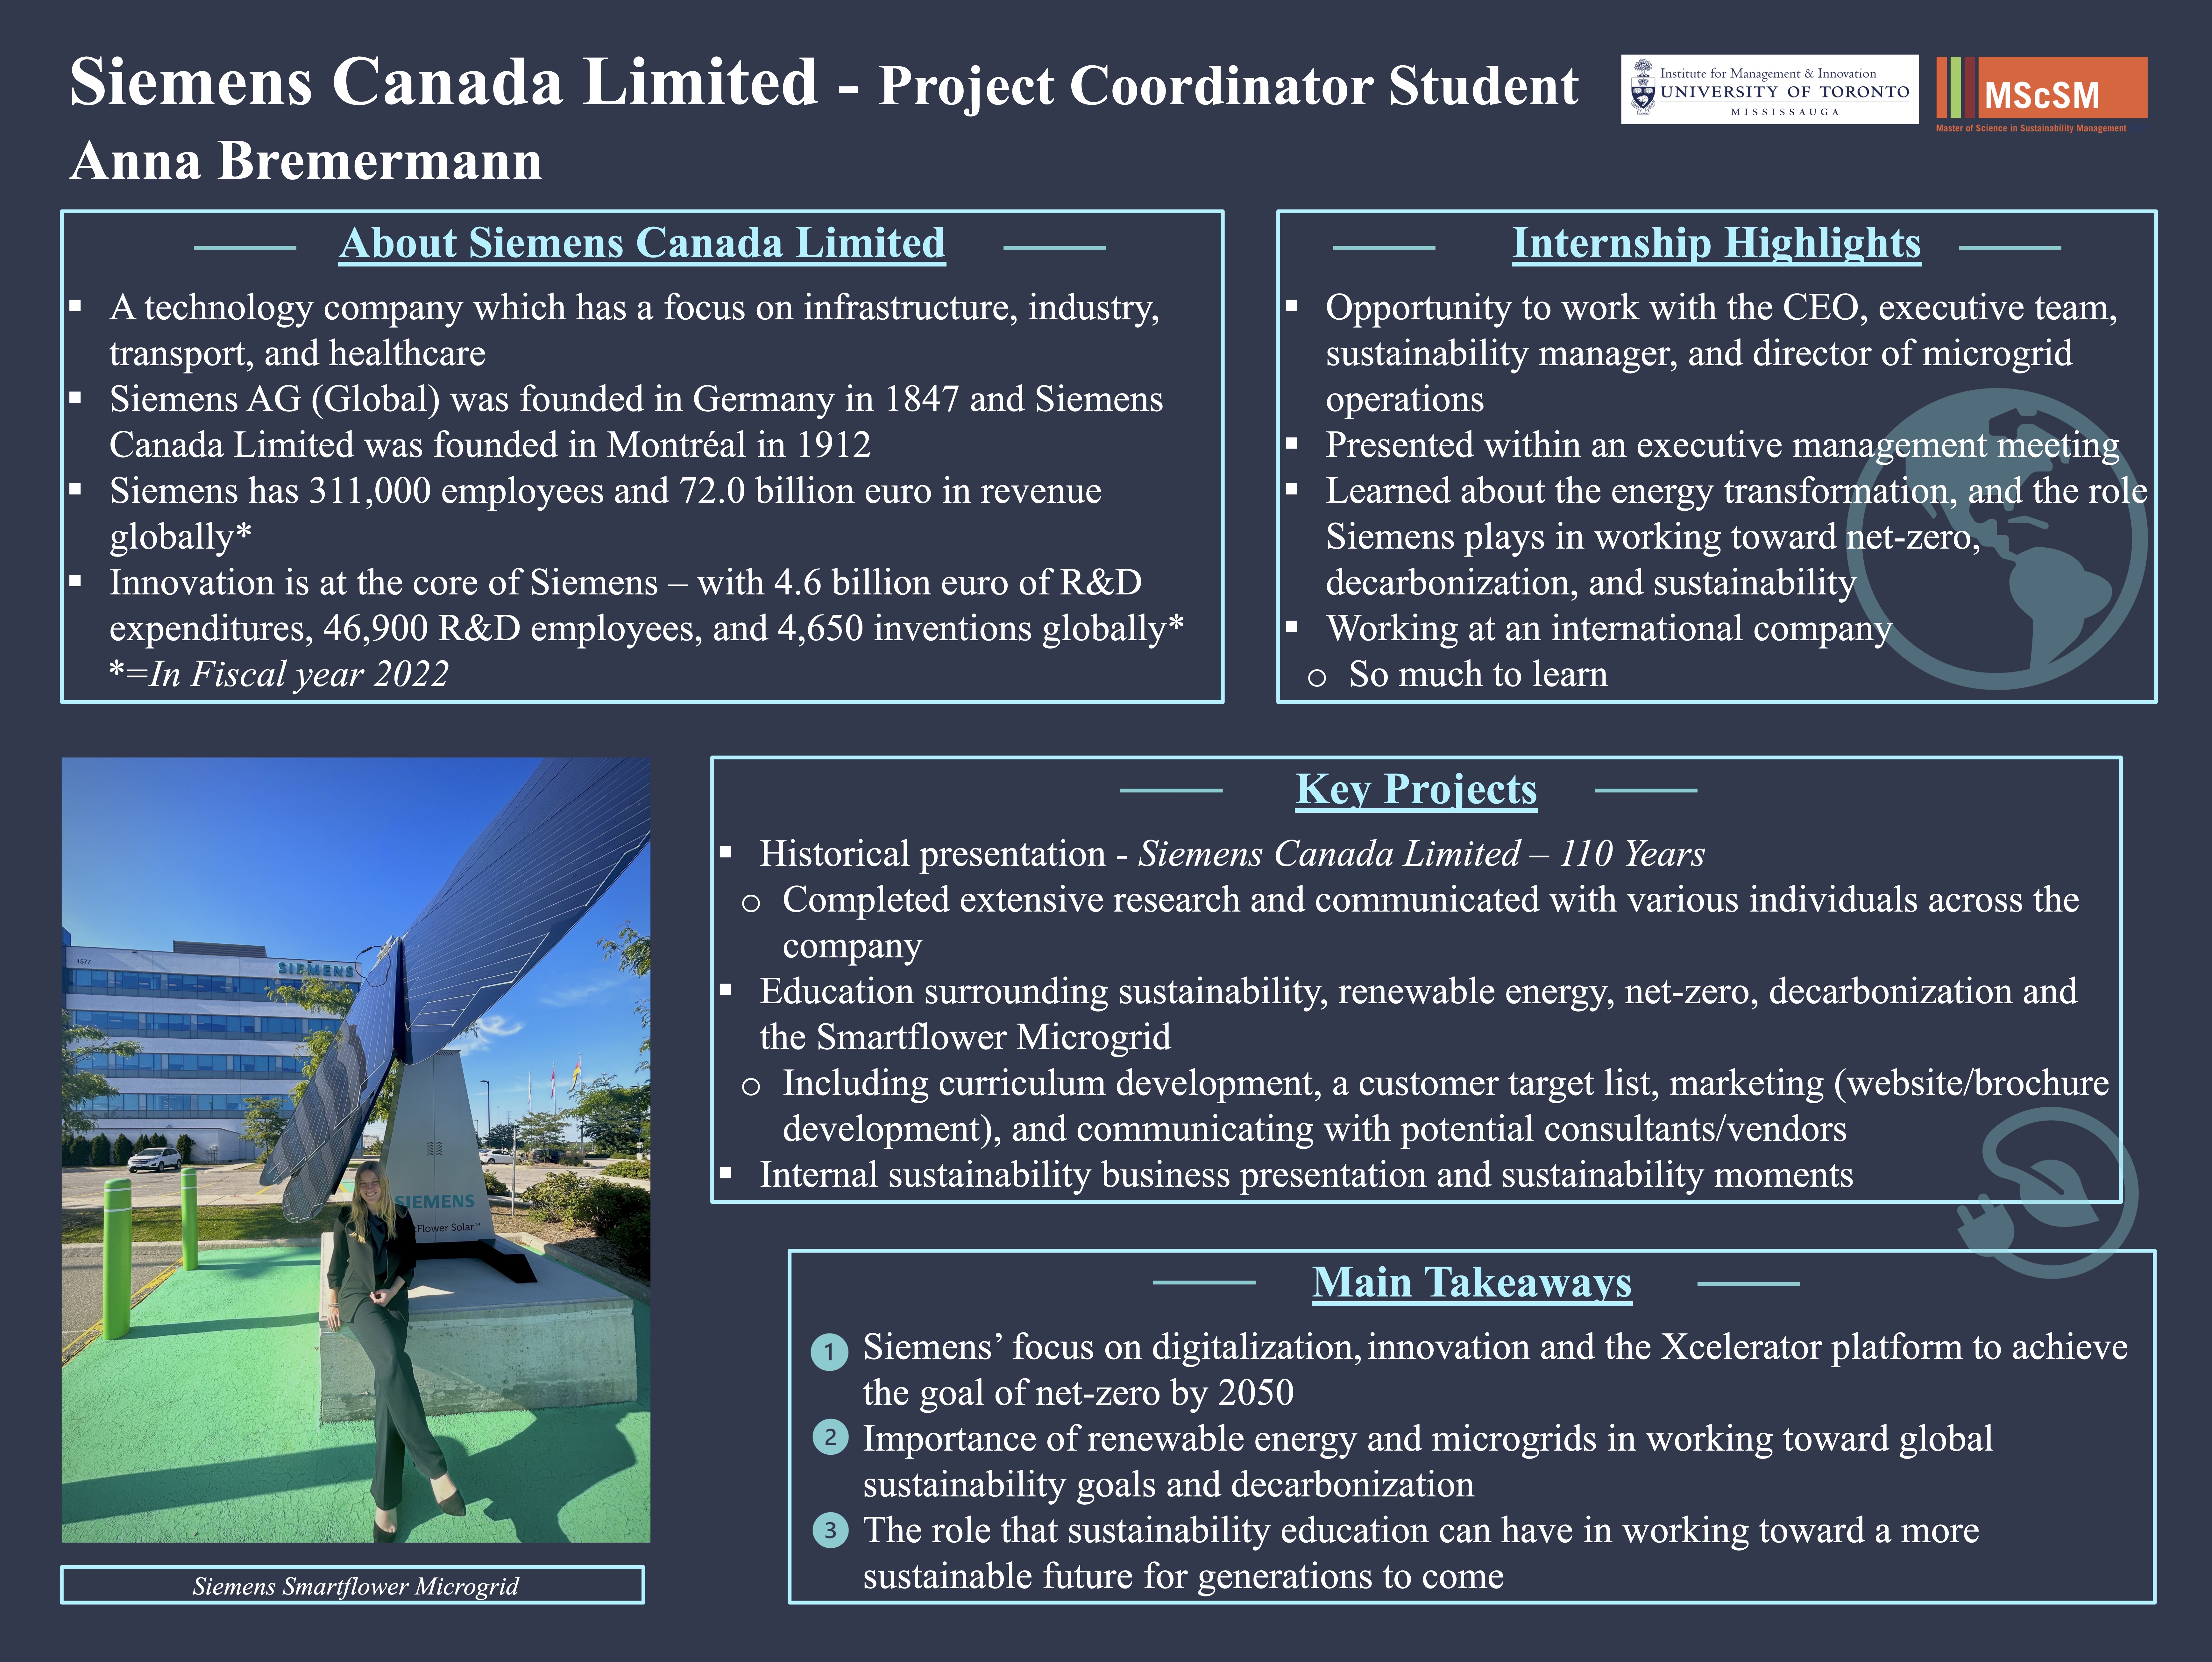 Showcase Image for Siemens Canada Limited - Project Coordinator Student